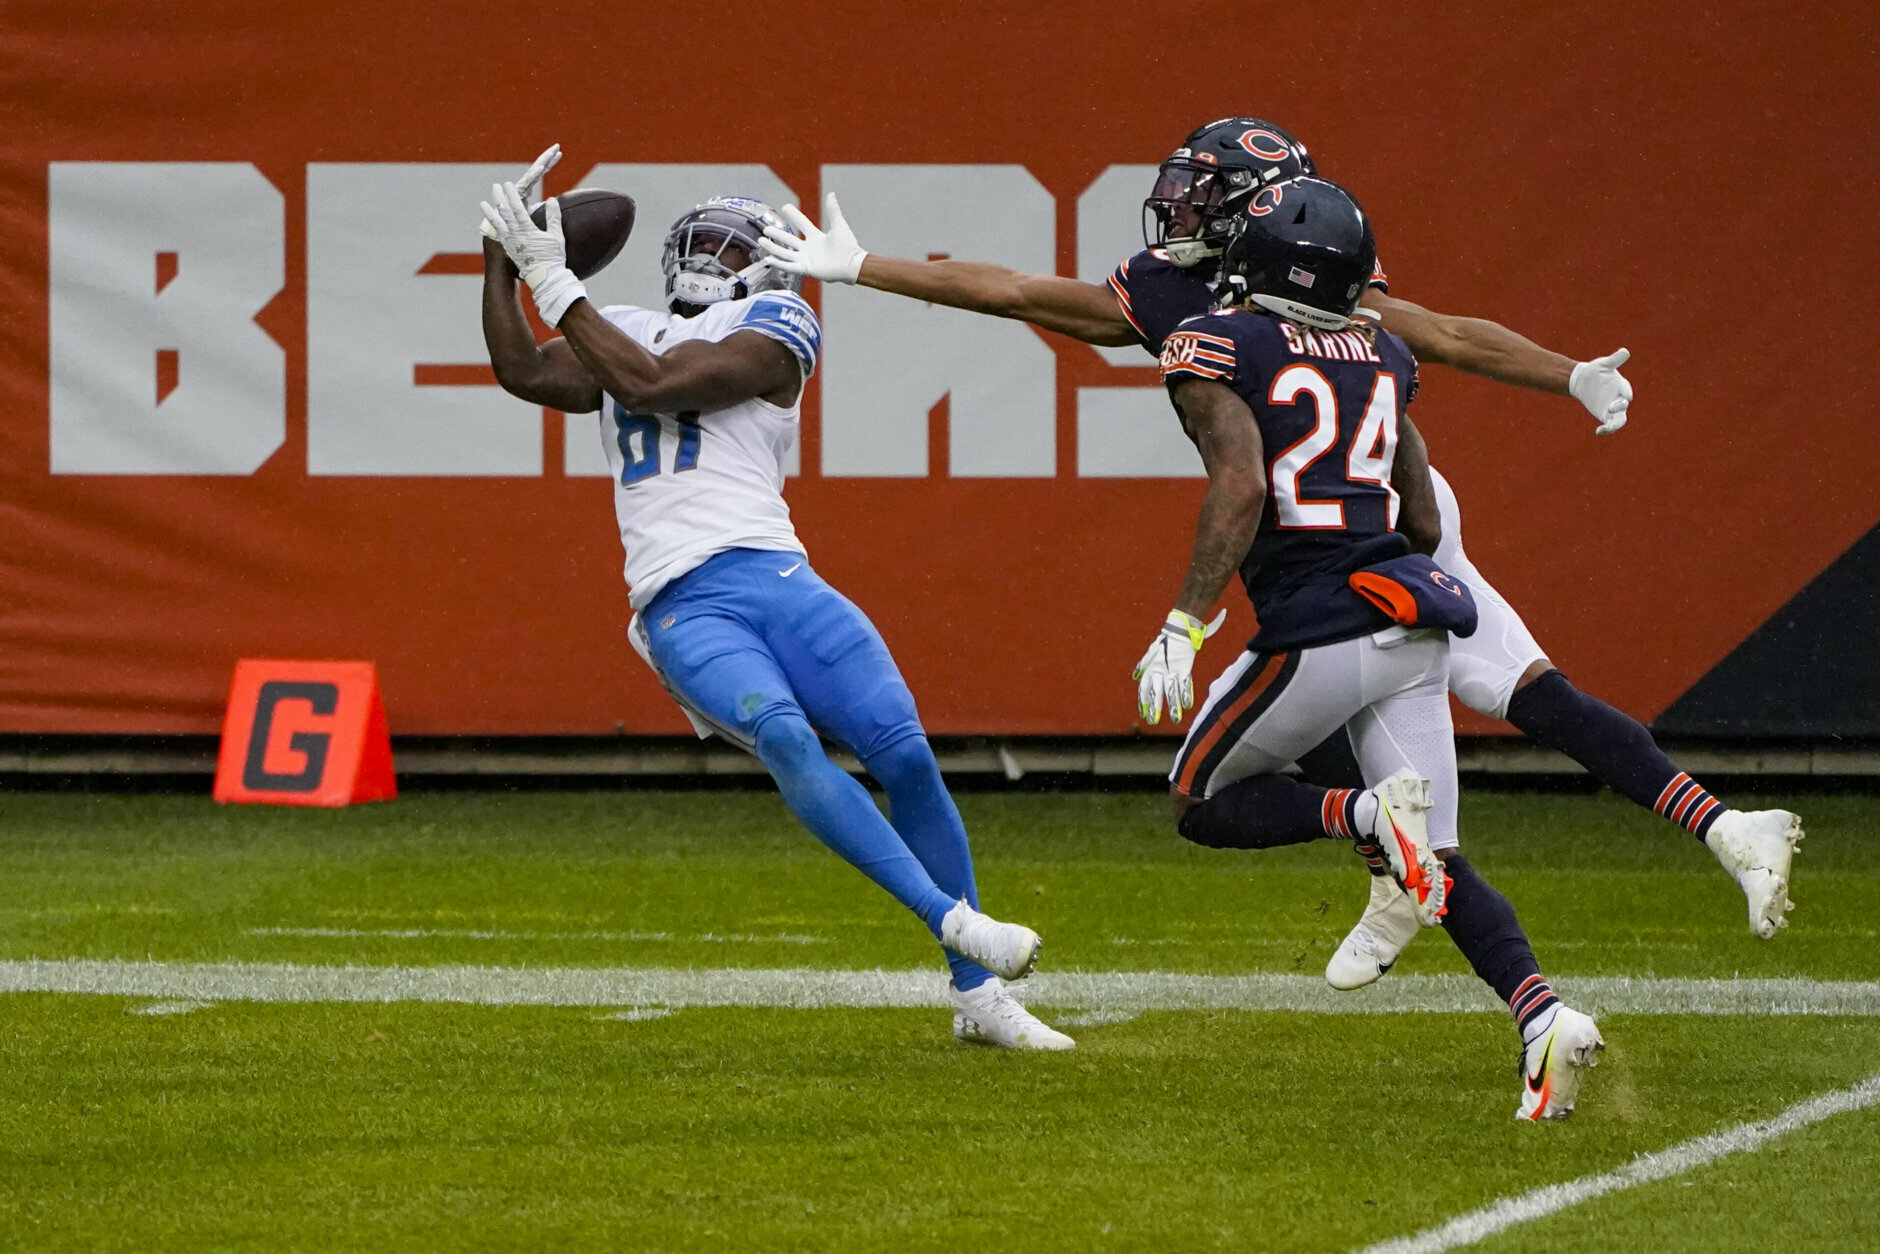 <p><b><i>Lions 34</i></b><br />
<b><i>Bears 30</i></b></p>
<p>Chicago&#8217;s fraudulent 5-1 start has evaporated to 5-7, and <a href="https://twitter.com/JasonLieser/status/1335698235034378241?s=20  ">Matt Nagy has no idea why</a>. Add this to the list of reasons the Bears will have a new coach in 2021.</p>
<p>Meanwhile, <a href="https://www.detroitnews.com/story/sports/nfl/lions/2020/11/30/darrell-bevell-jacked-up-chance-be-detroit-lions-head-coach/6470663002/">a &#8220;jacked up&#8221; Darrell Bevell</a> apparently has the same impact on the Lions as <a href="https://www.youtube.com/watch?v=RLe09qoyPP8">Mountain Dew has on Ricky Bobby&#8217;s boys</a>. Detroit finishes the season against four playoff contenders, so perhaps some more &#8220;<a href="https://www.youtube.com/watch?v=sLF31AY25so">Shake N Bake</a>&#8221; in a game or two down the stretch gives him a shot at the full time gig.</p>
